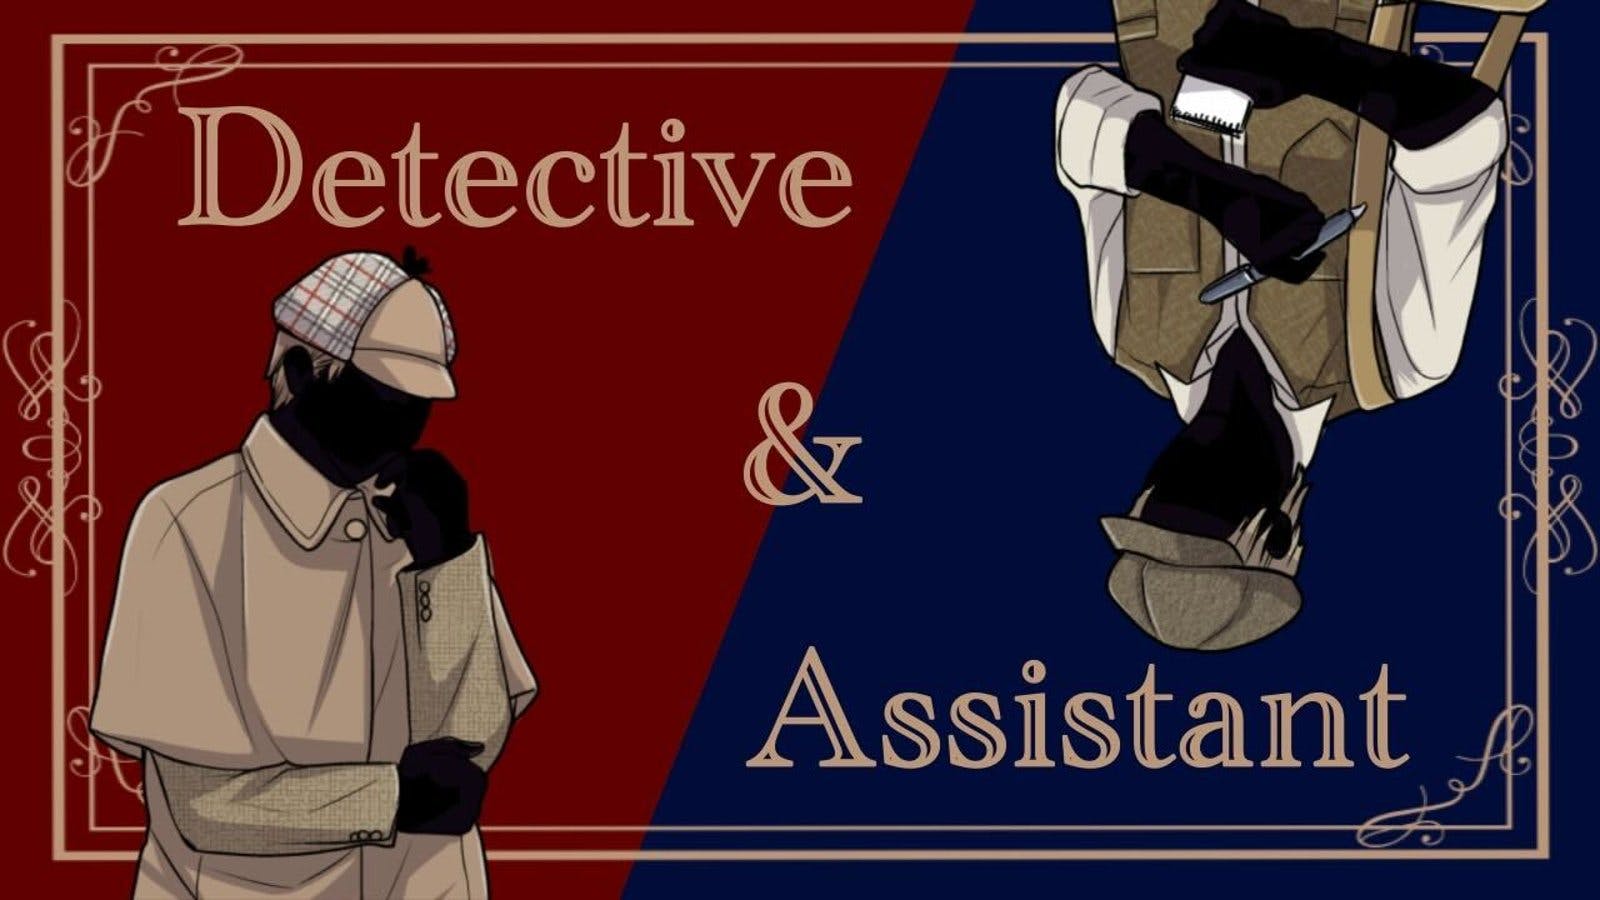 Detective and Assistant